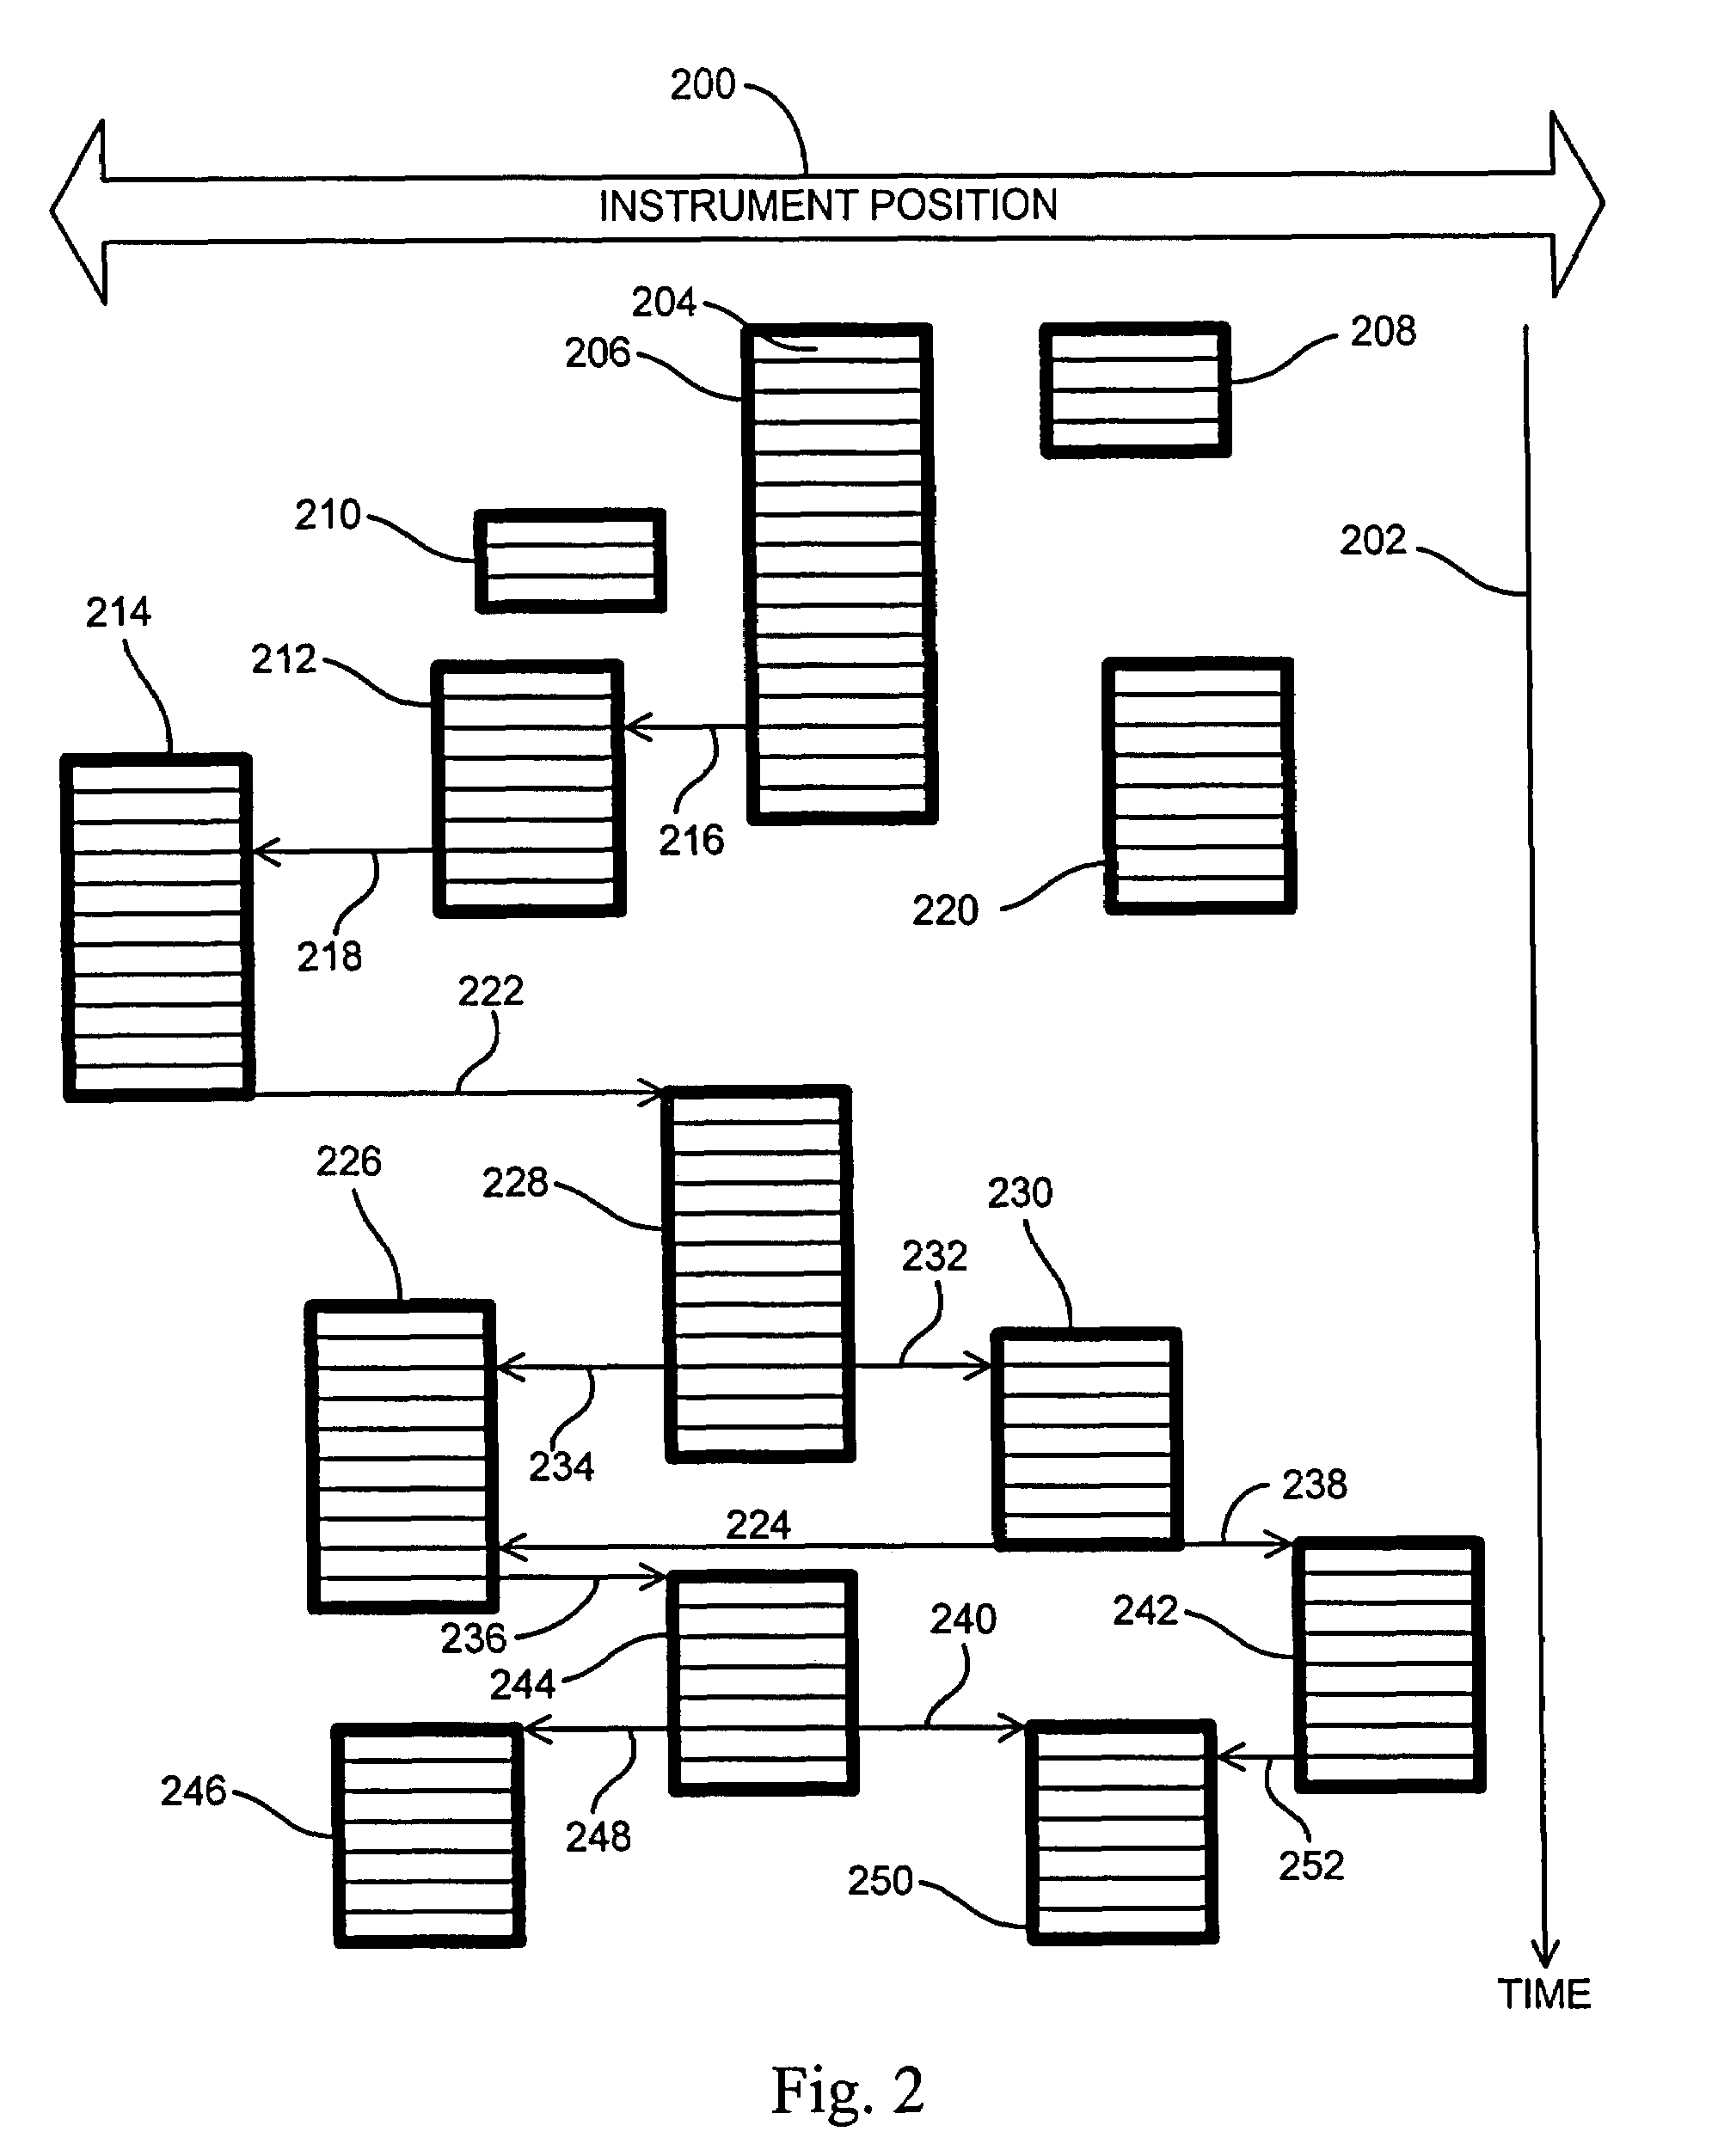 Method of automated musical instrument finger finding